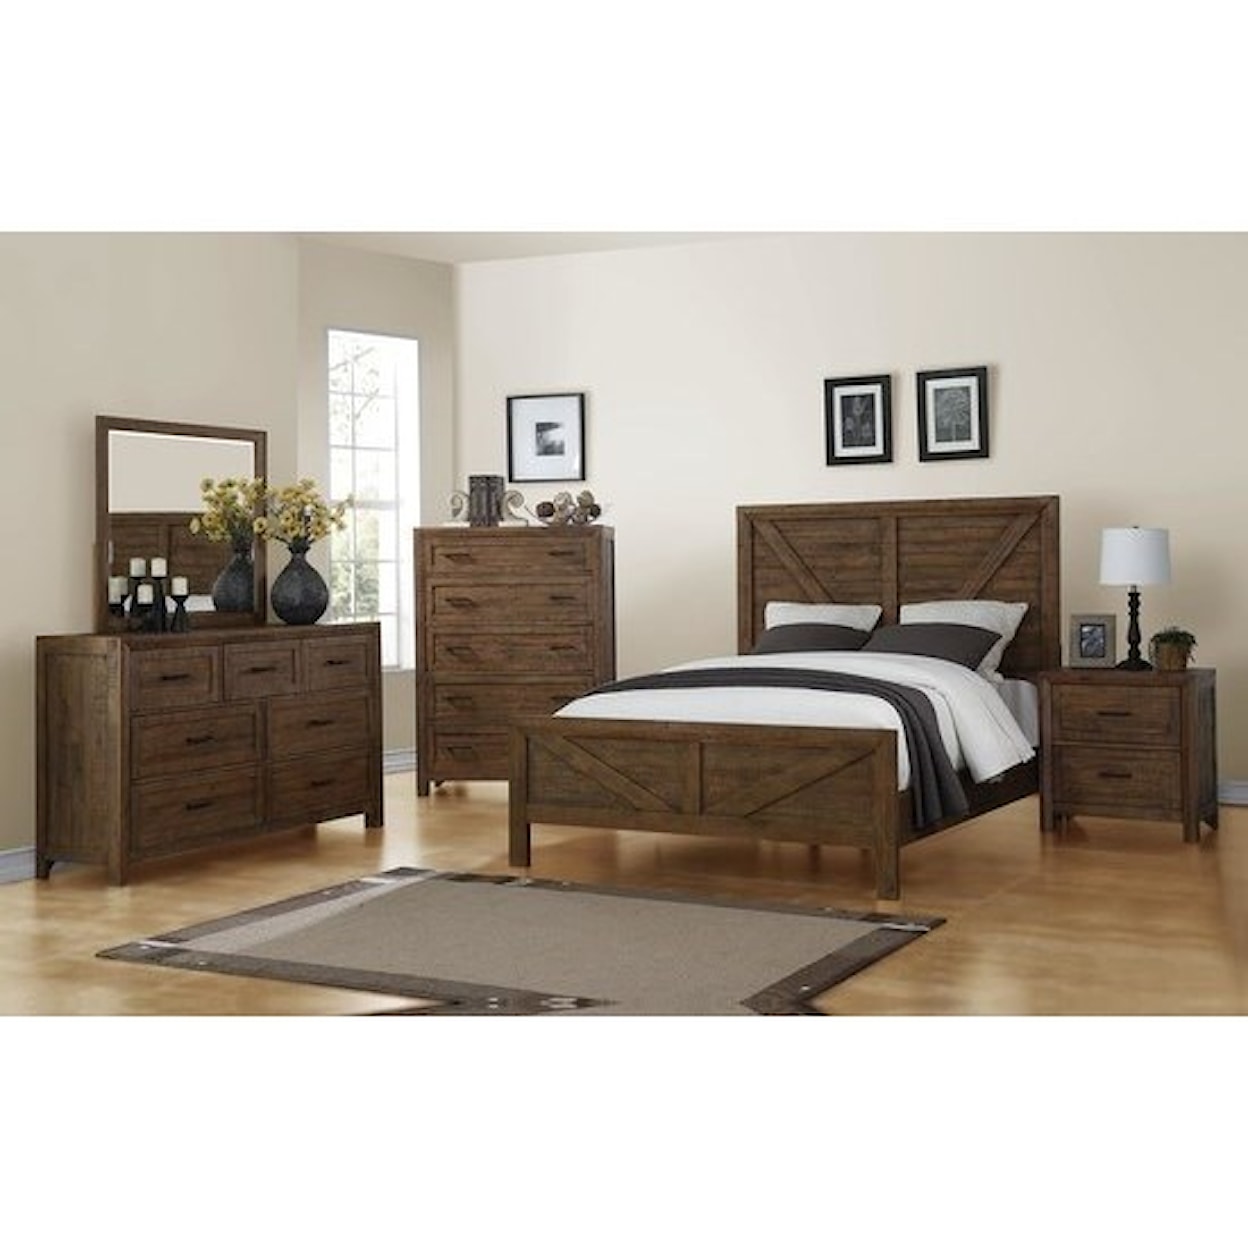 Emerald Pine Valley King Panel Bed